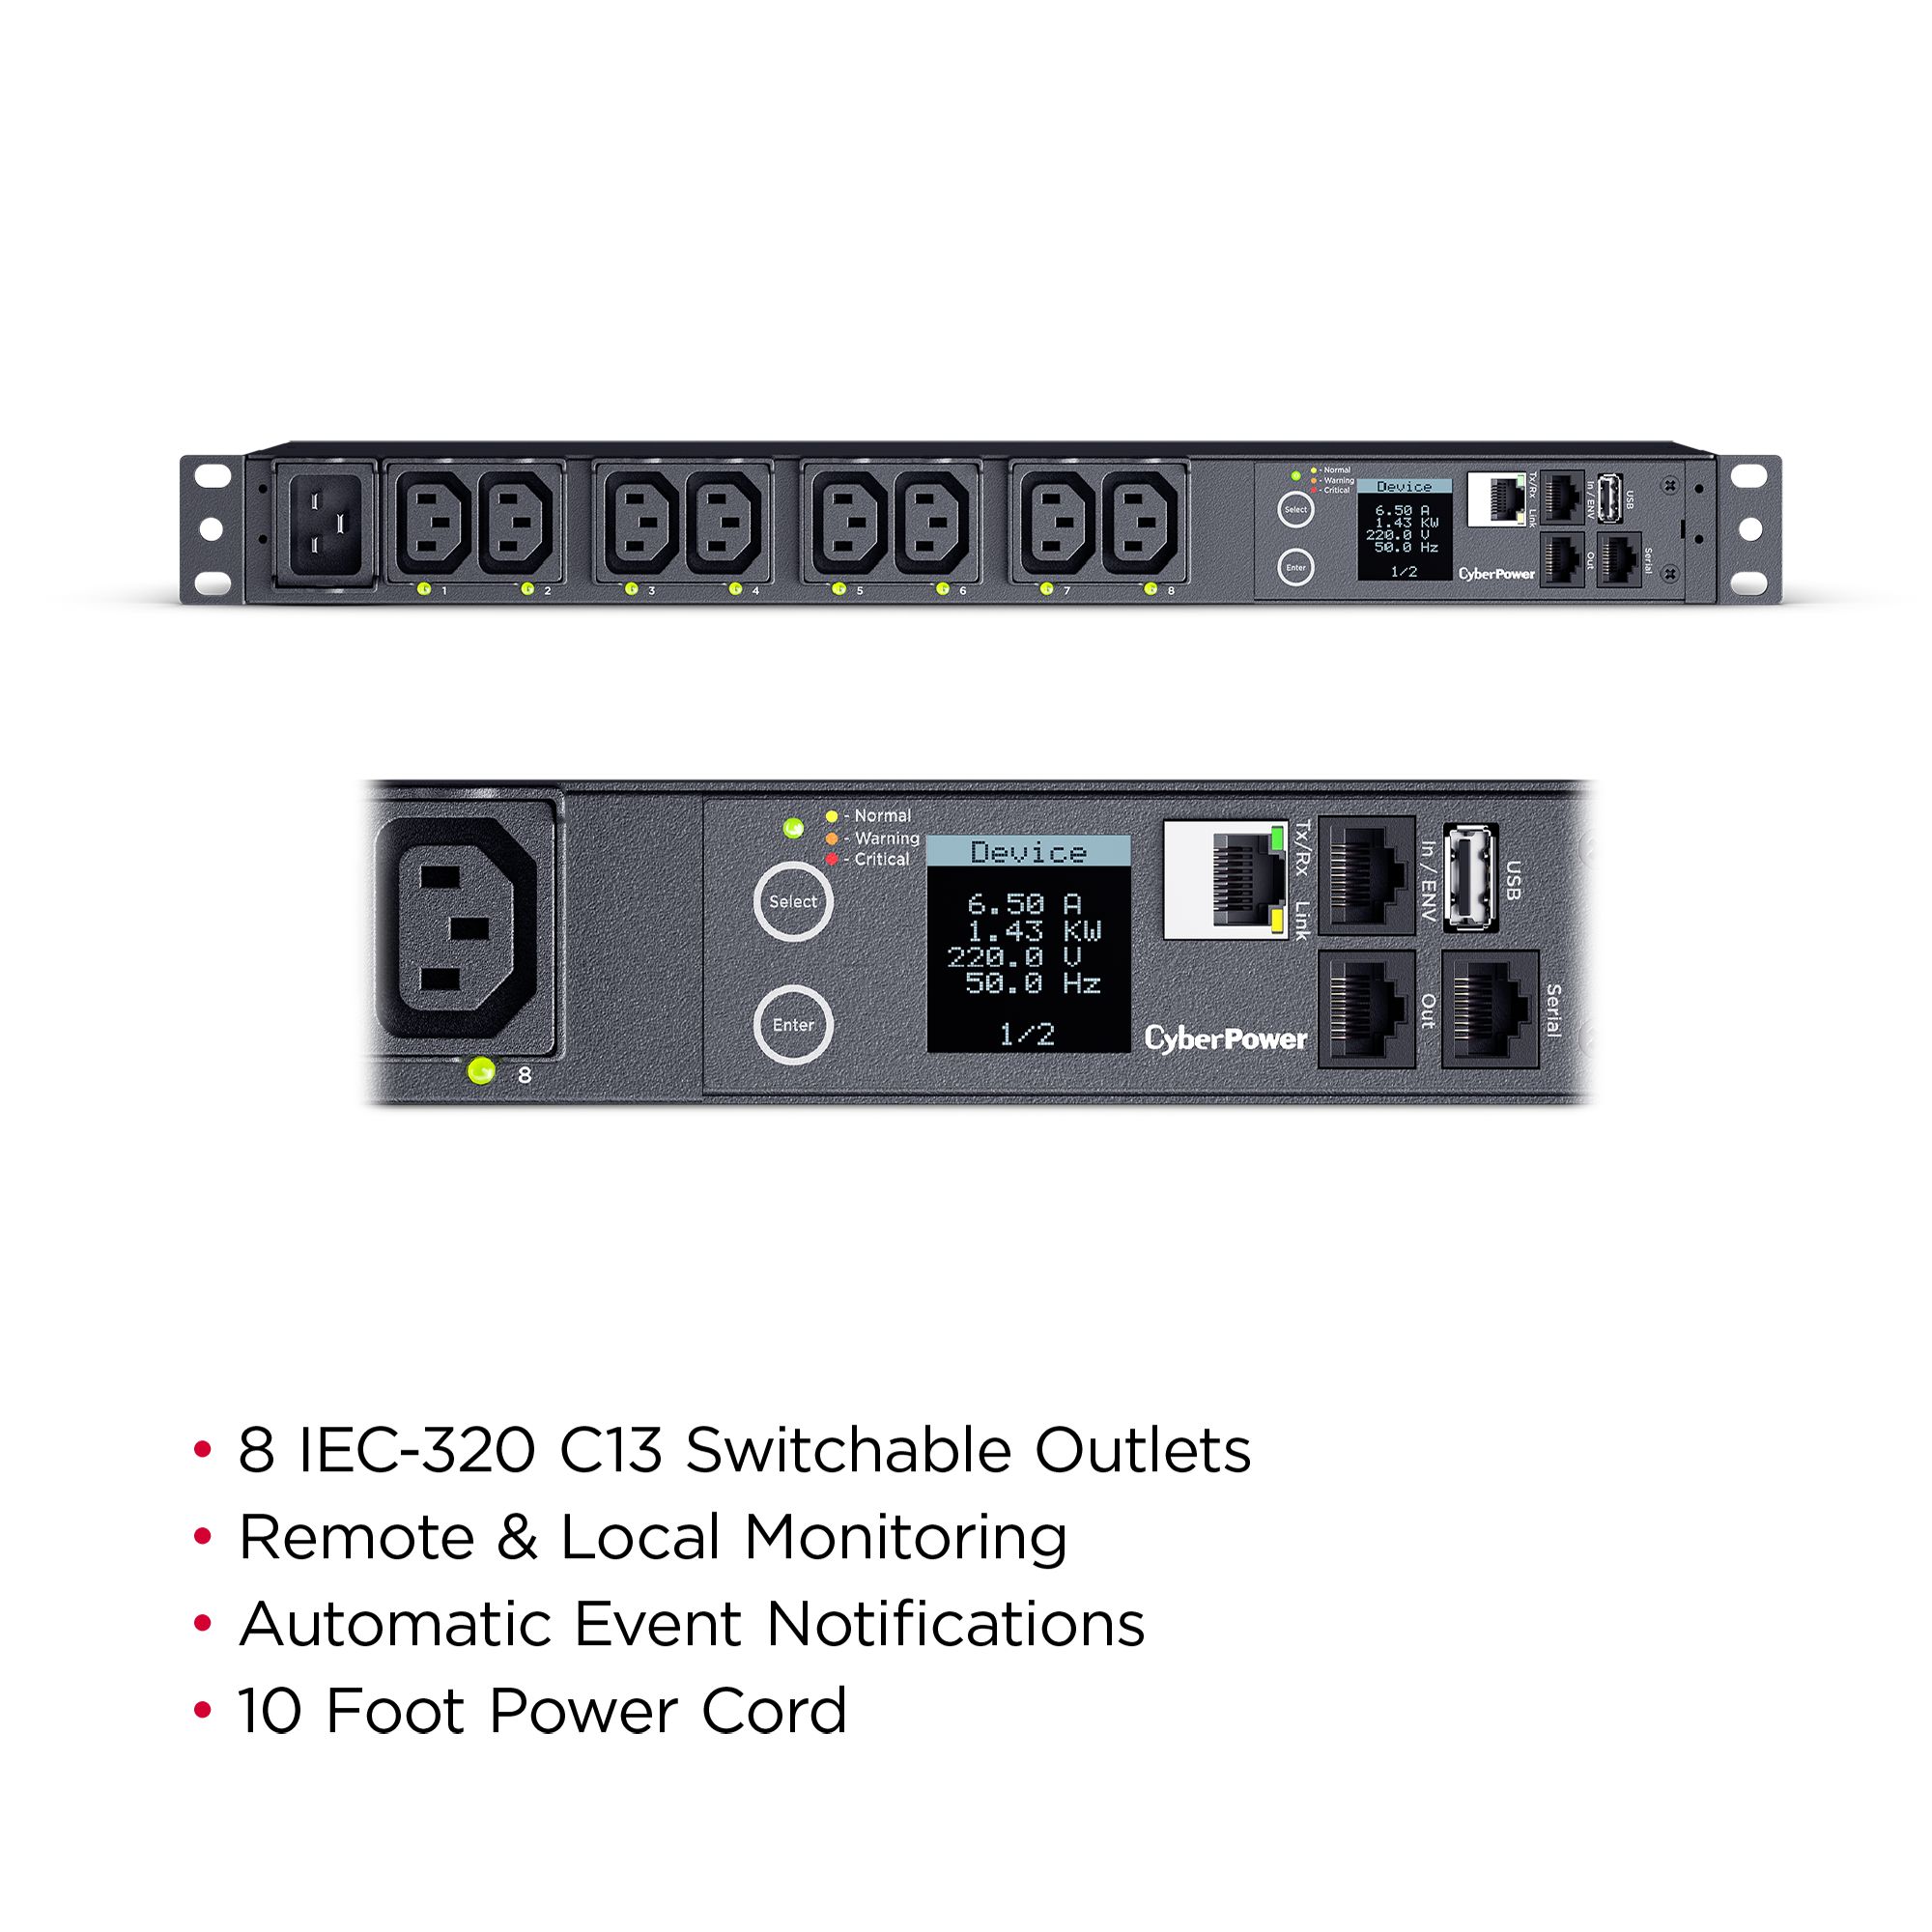 Remote PDU Power Switch - Controlled by Telephone